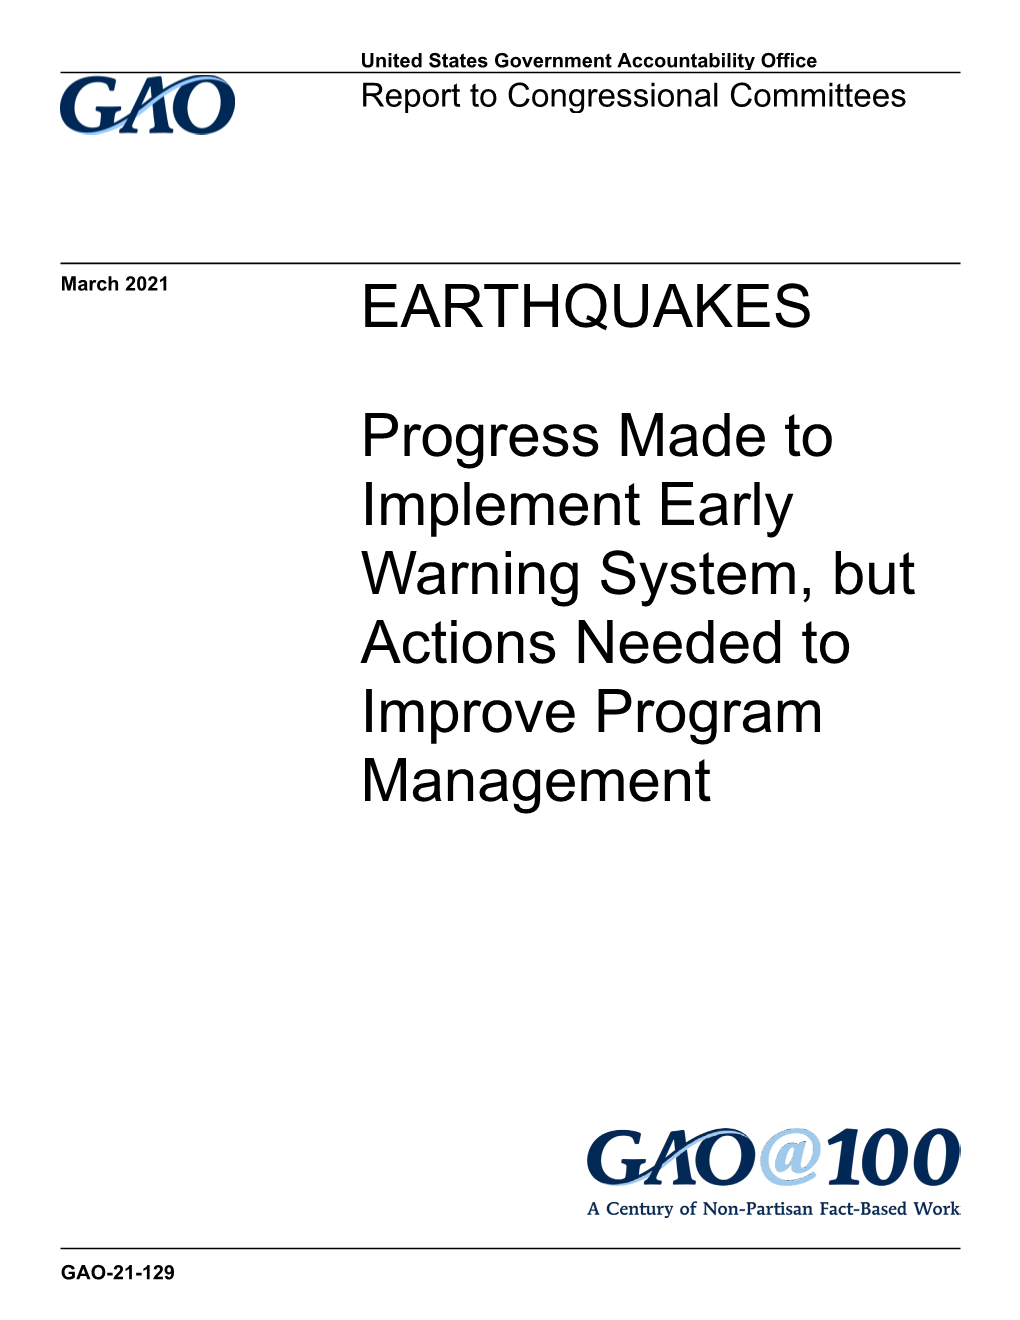 GAO-21-129, EARTHQUAKES: Progress Made to Implement Early